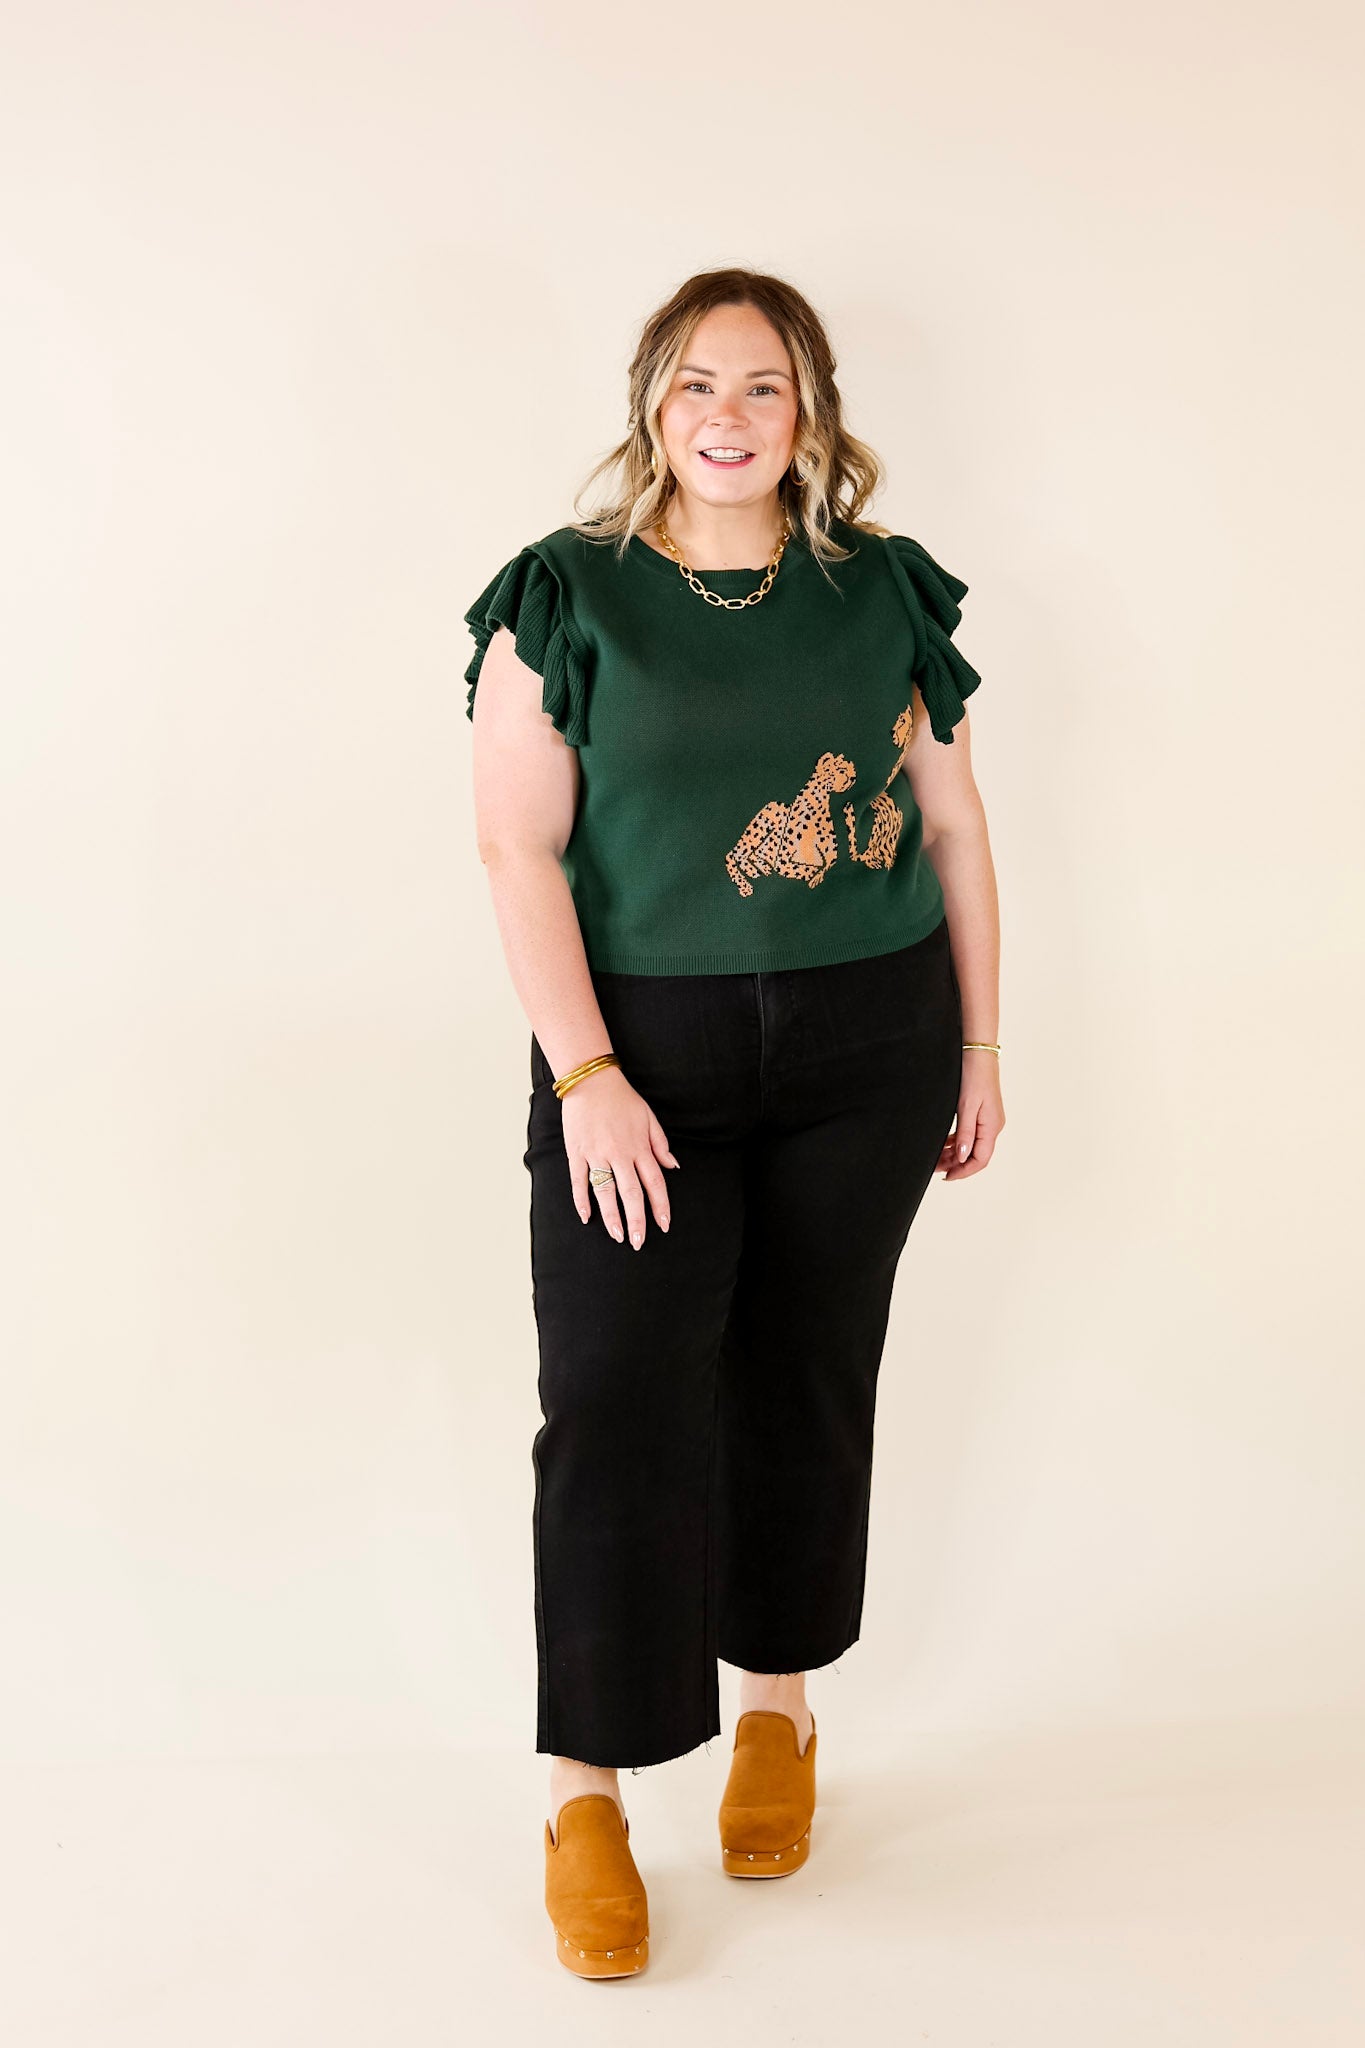 Upscale Charm Cheetah Print Sweater Top in Hunter Green - Giddy Up Glamour Boutique